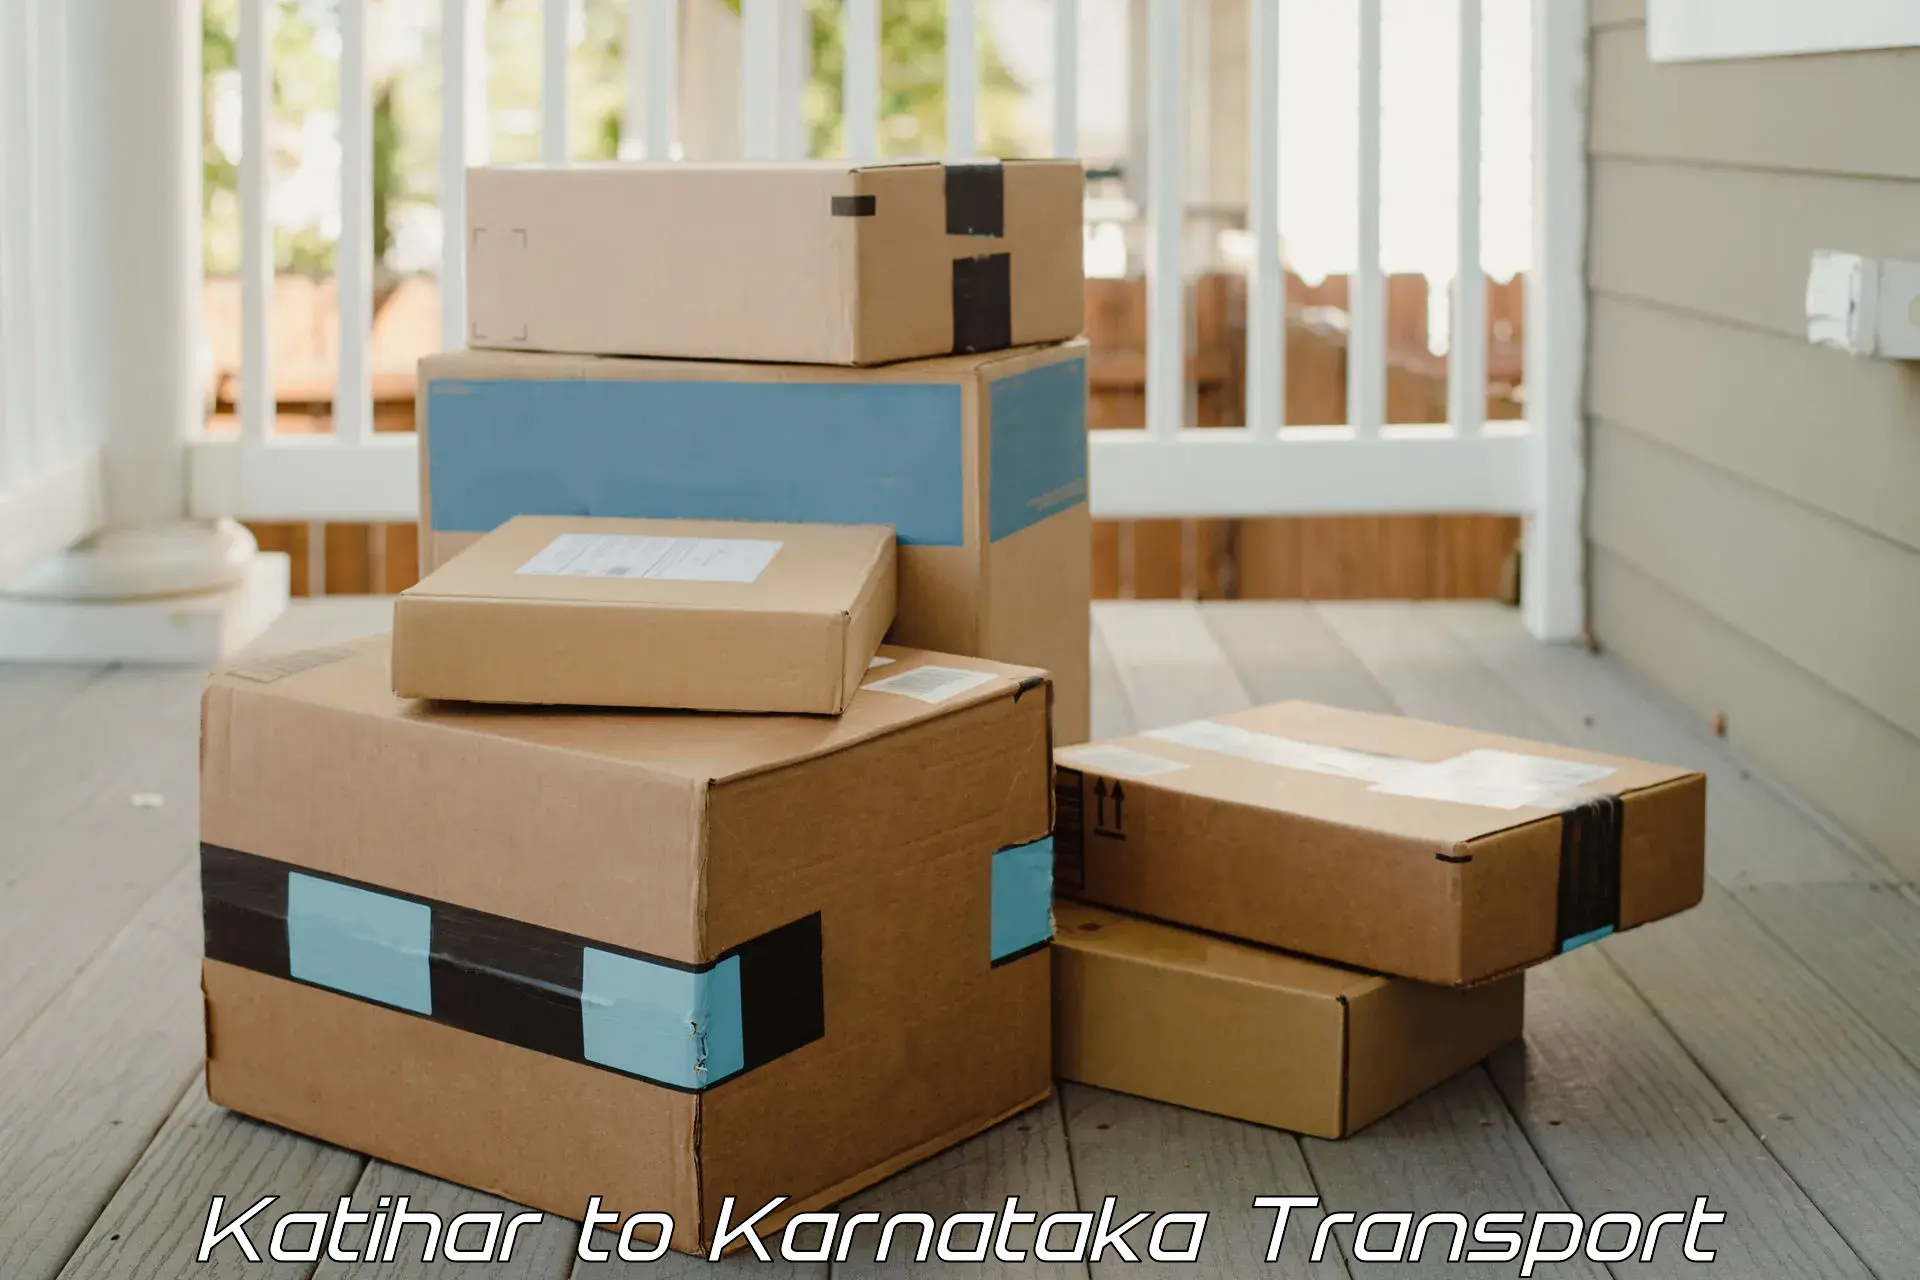 Container transportation services in Katihar to Yellapur